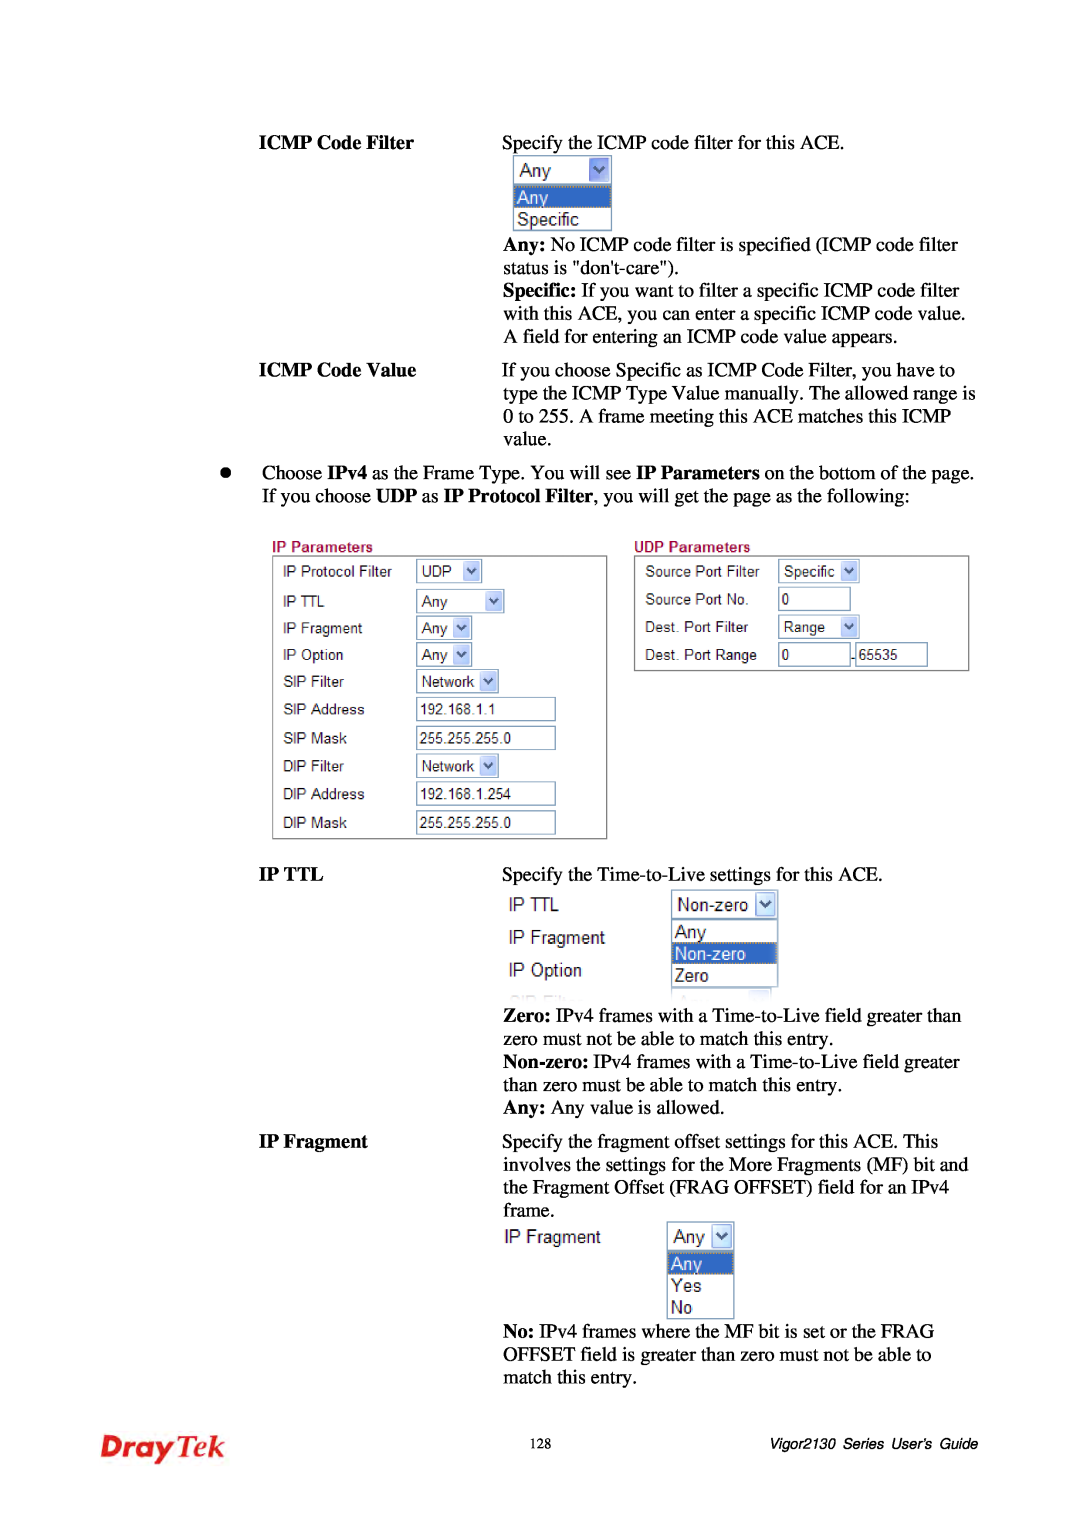 Draytek 2130 manual ICMP Code Filter, ICMP Code Value, Ip Ttl, IP Fragment, Specify the ICMP code filter for this ACE 